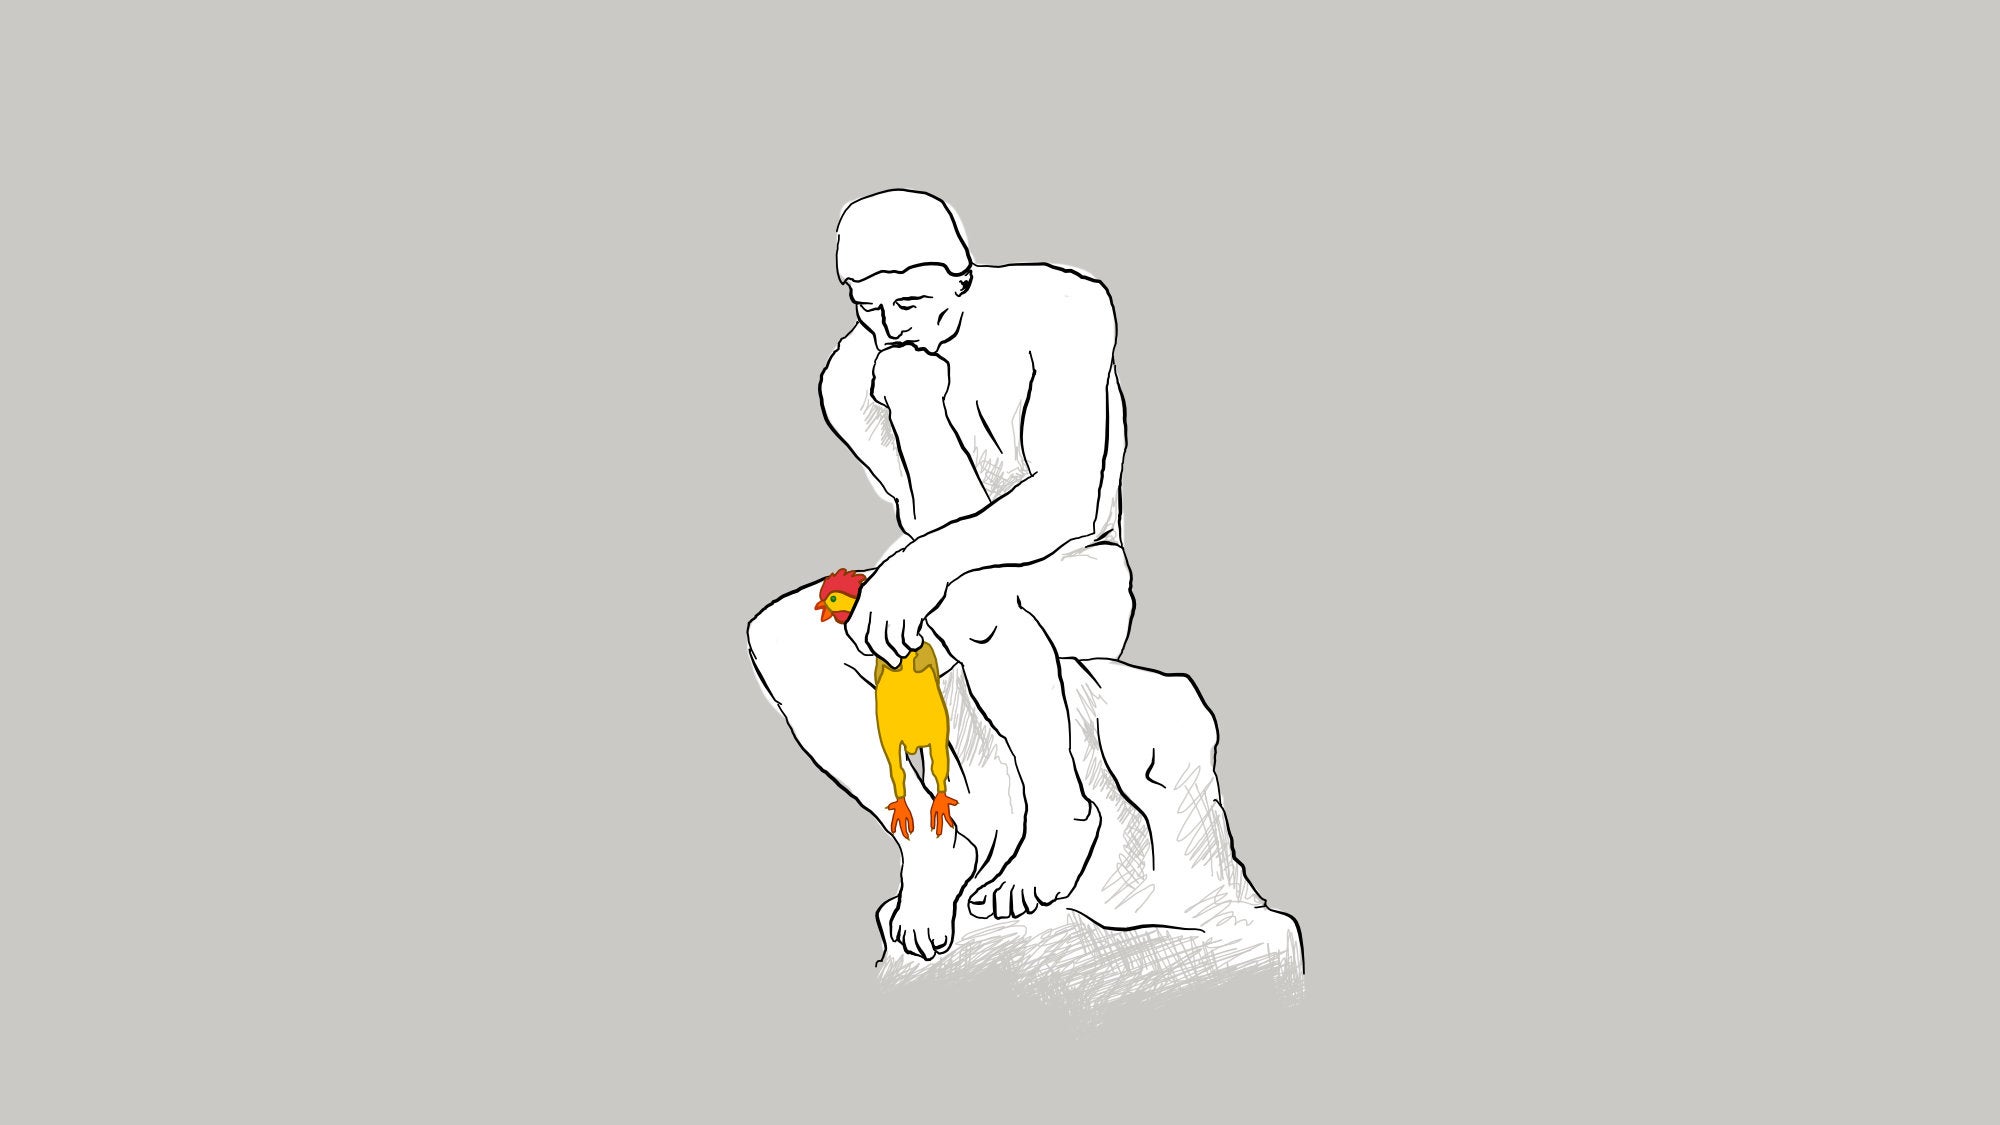 Illustration of The Thinker holding a rubber chicken